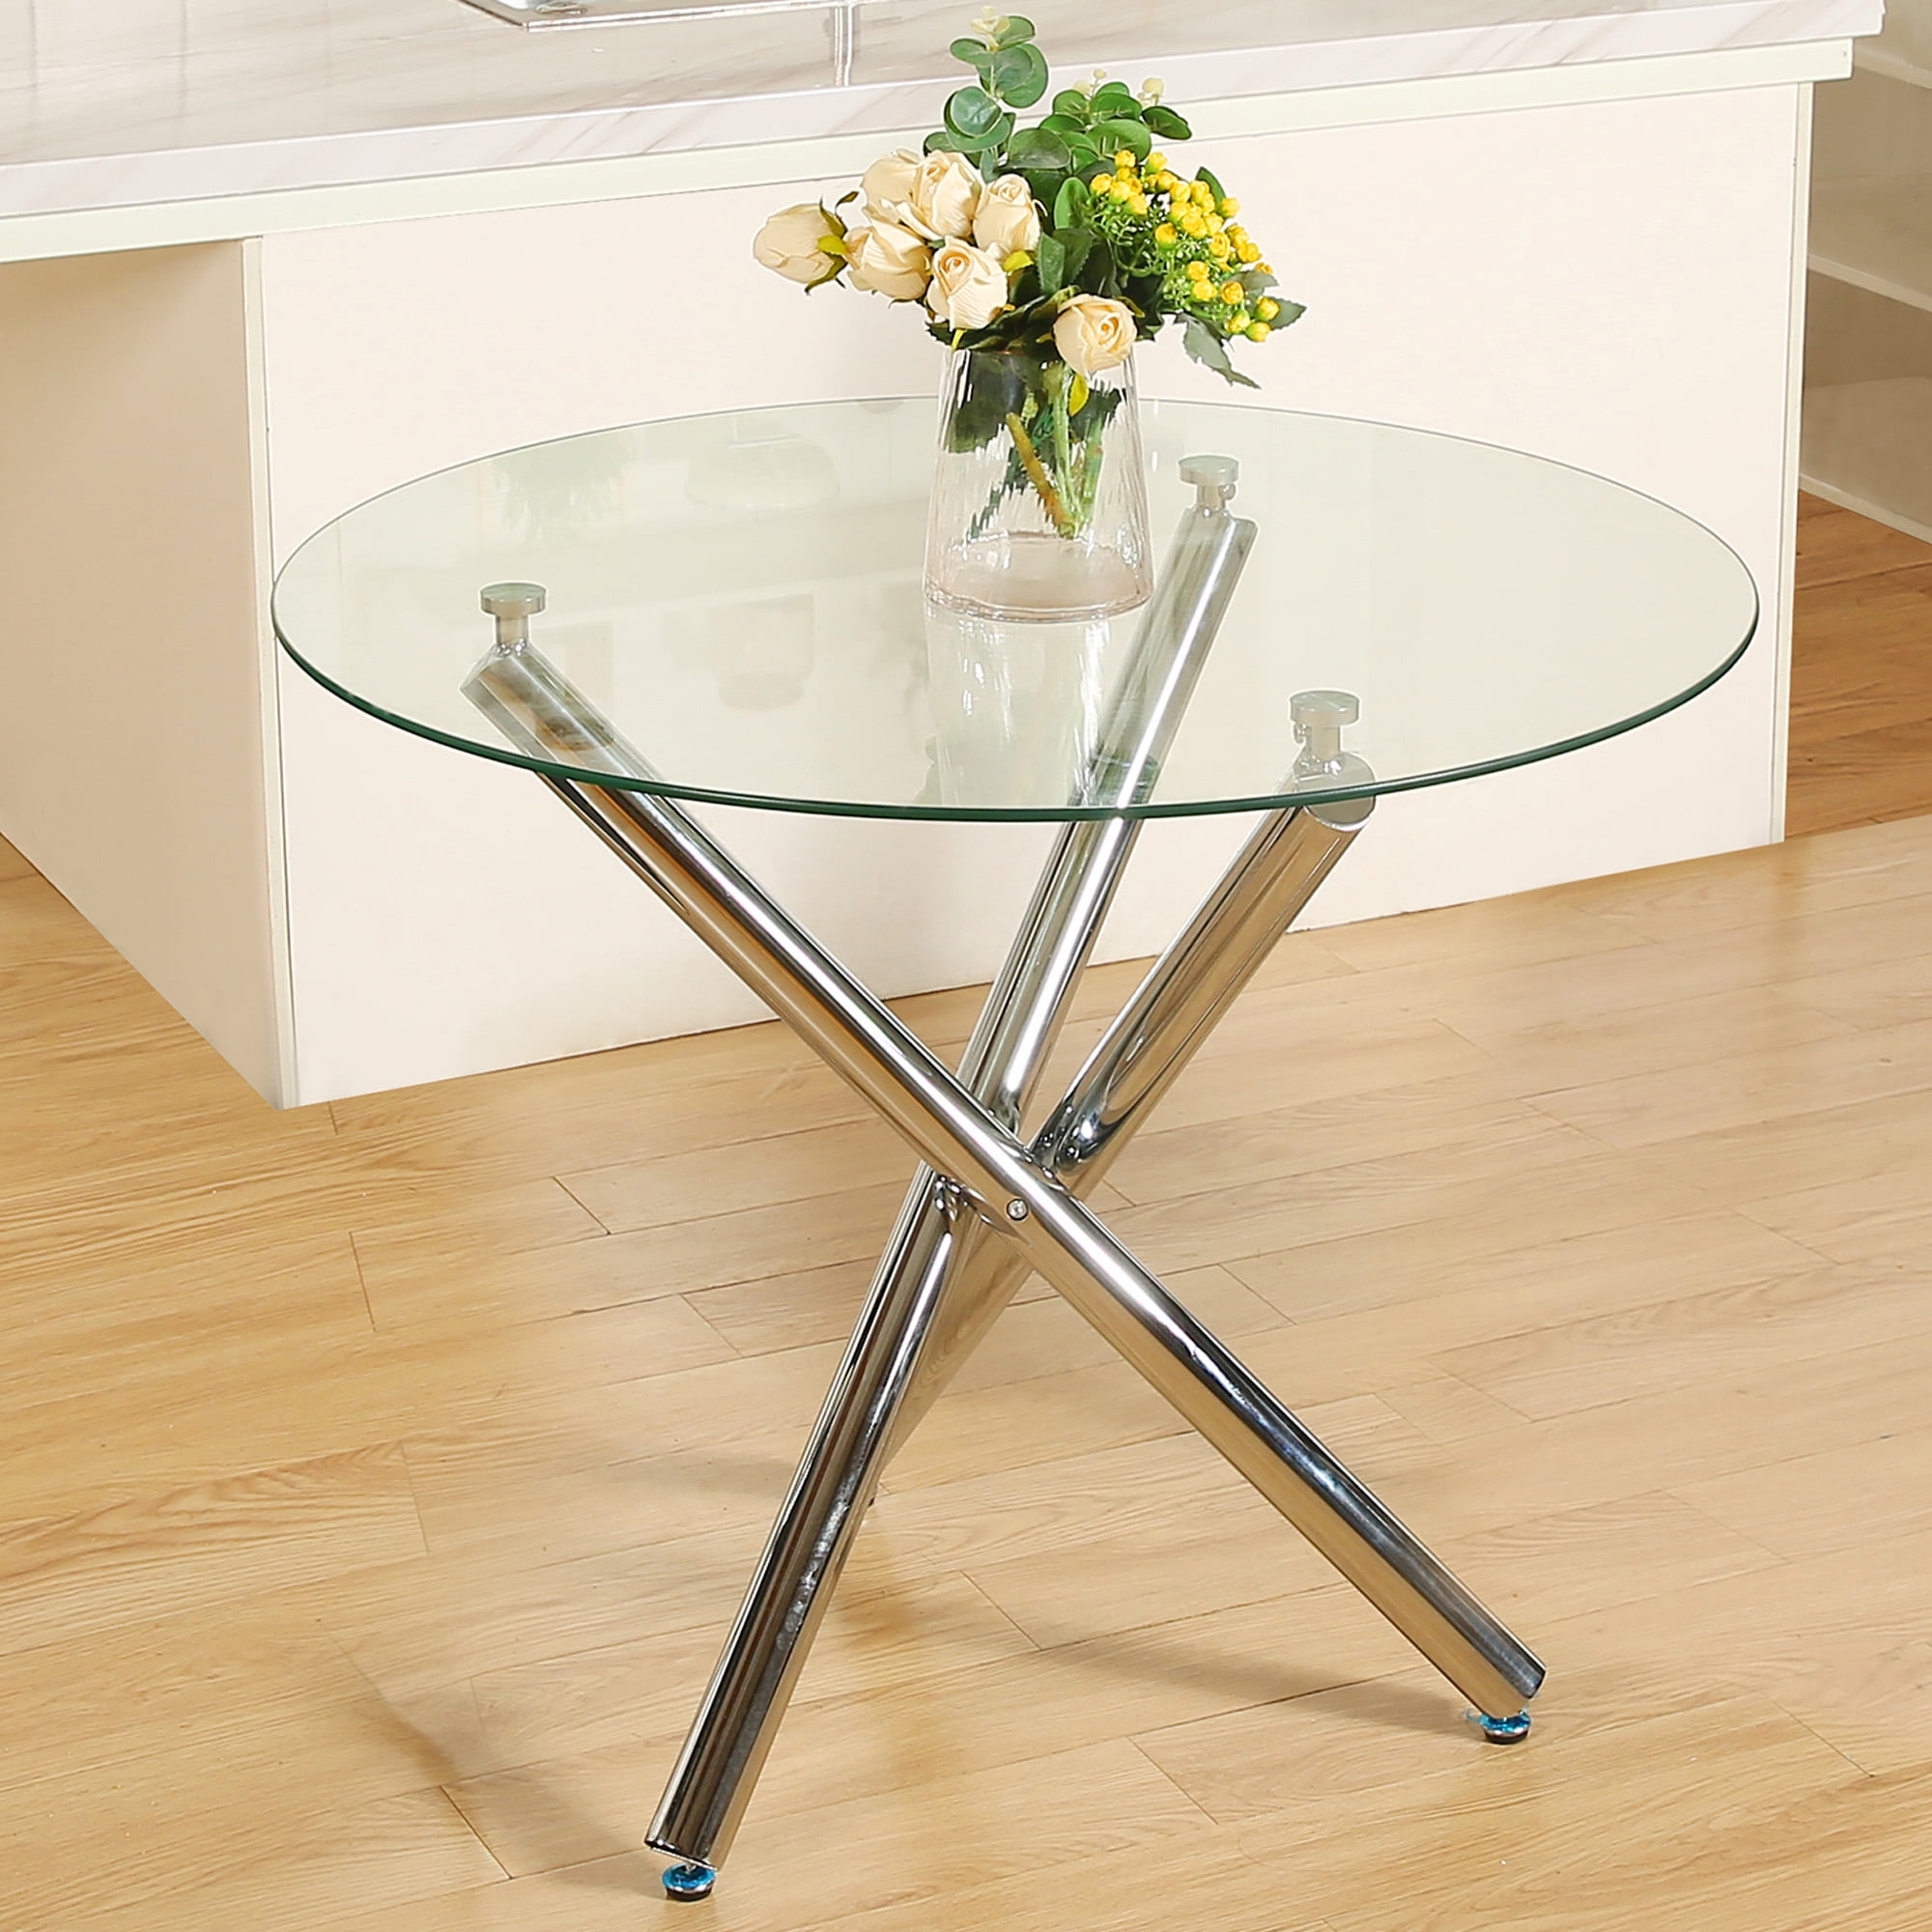 Omni House Round Dining Room Table, Modern Glass Dining Table Round